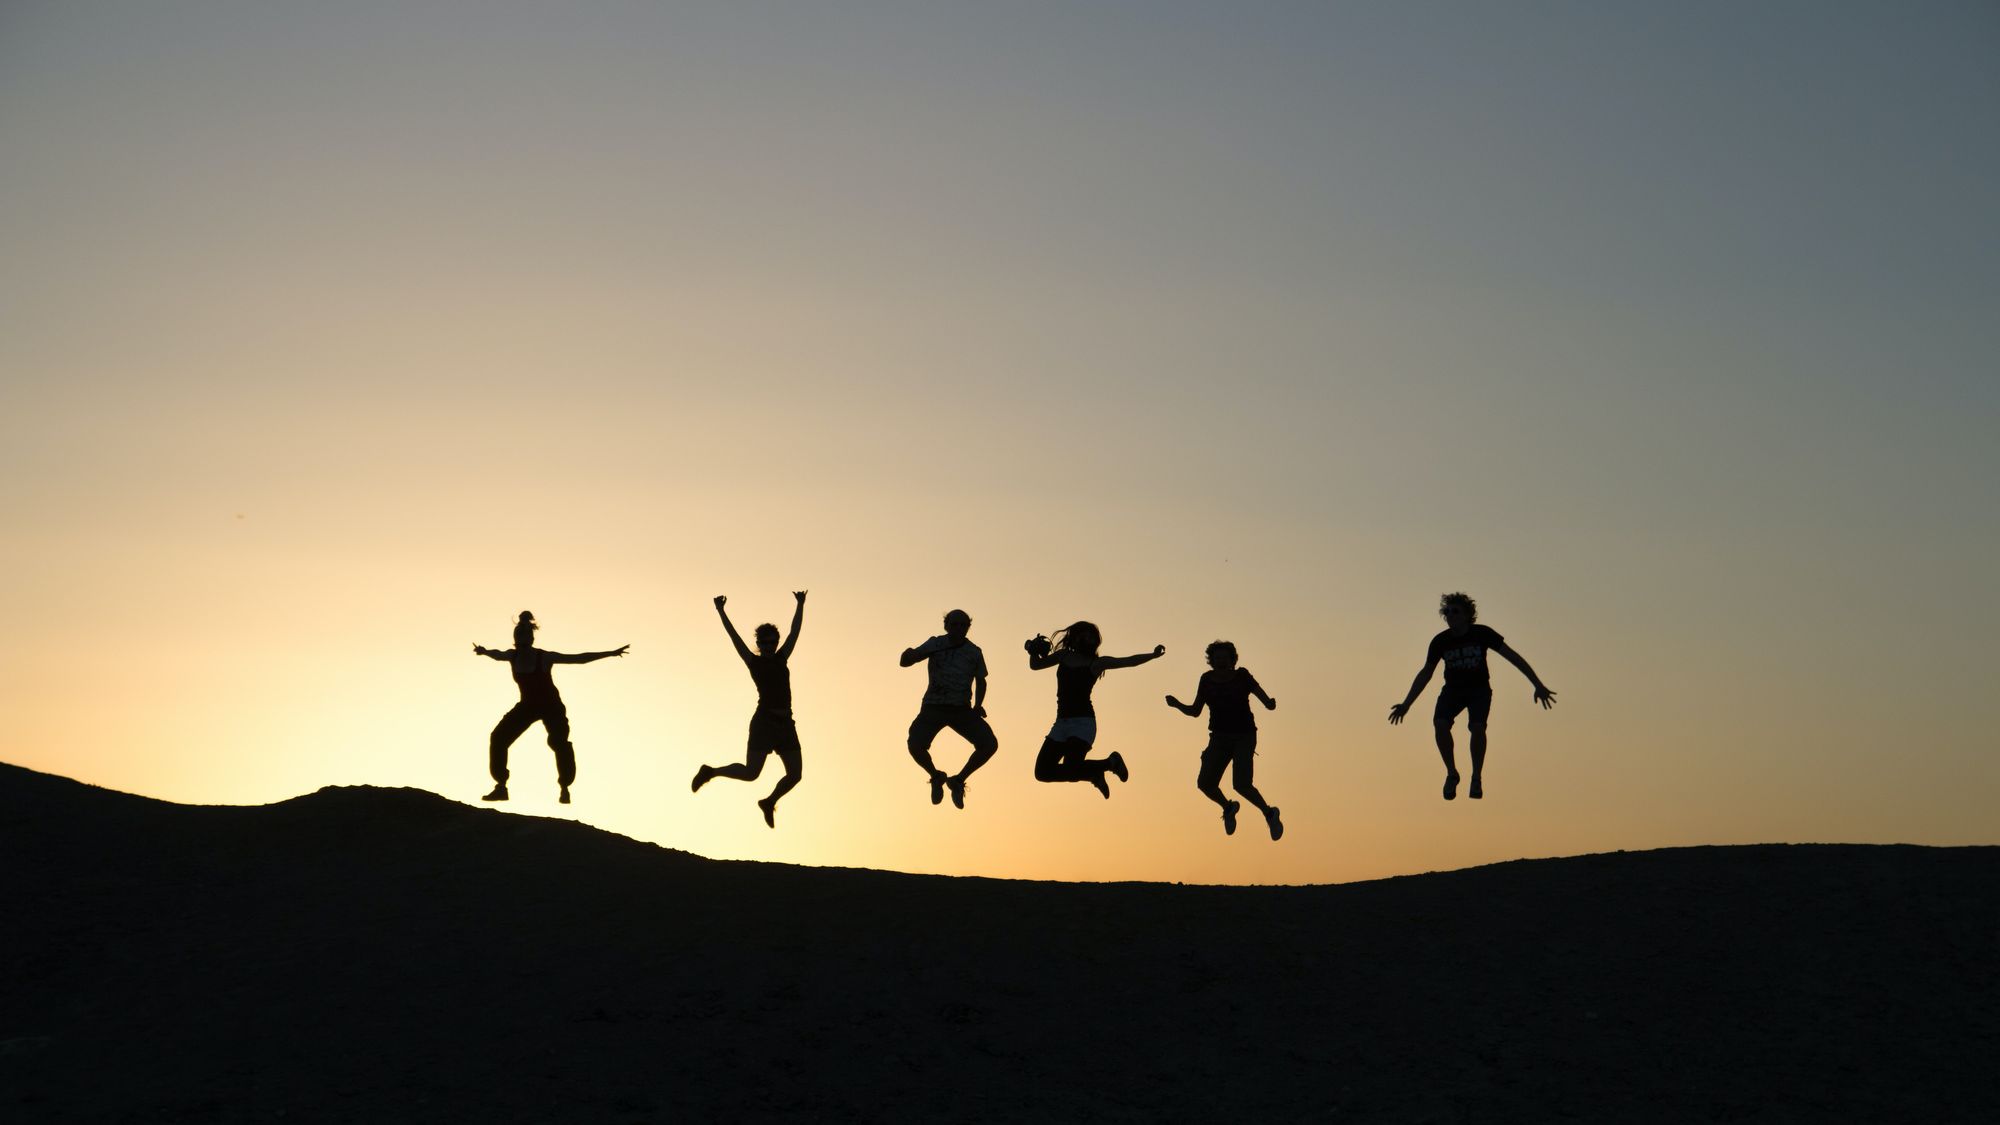 Silhouettes of 6 people jumping during sunset